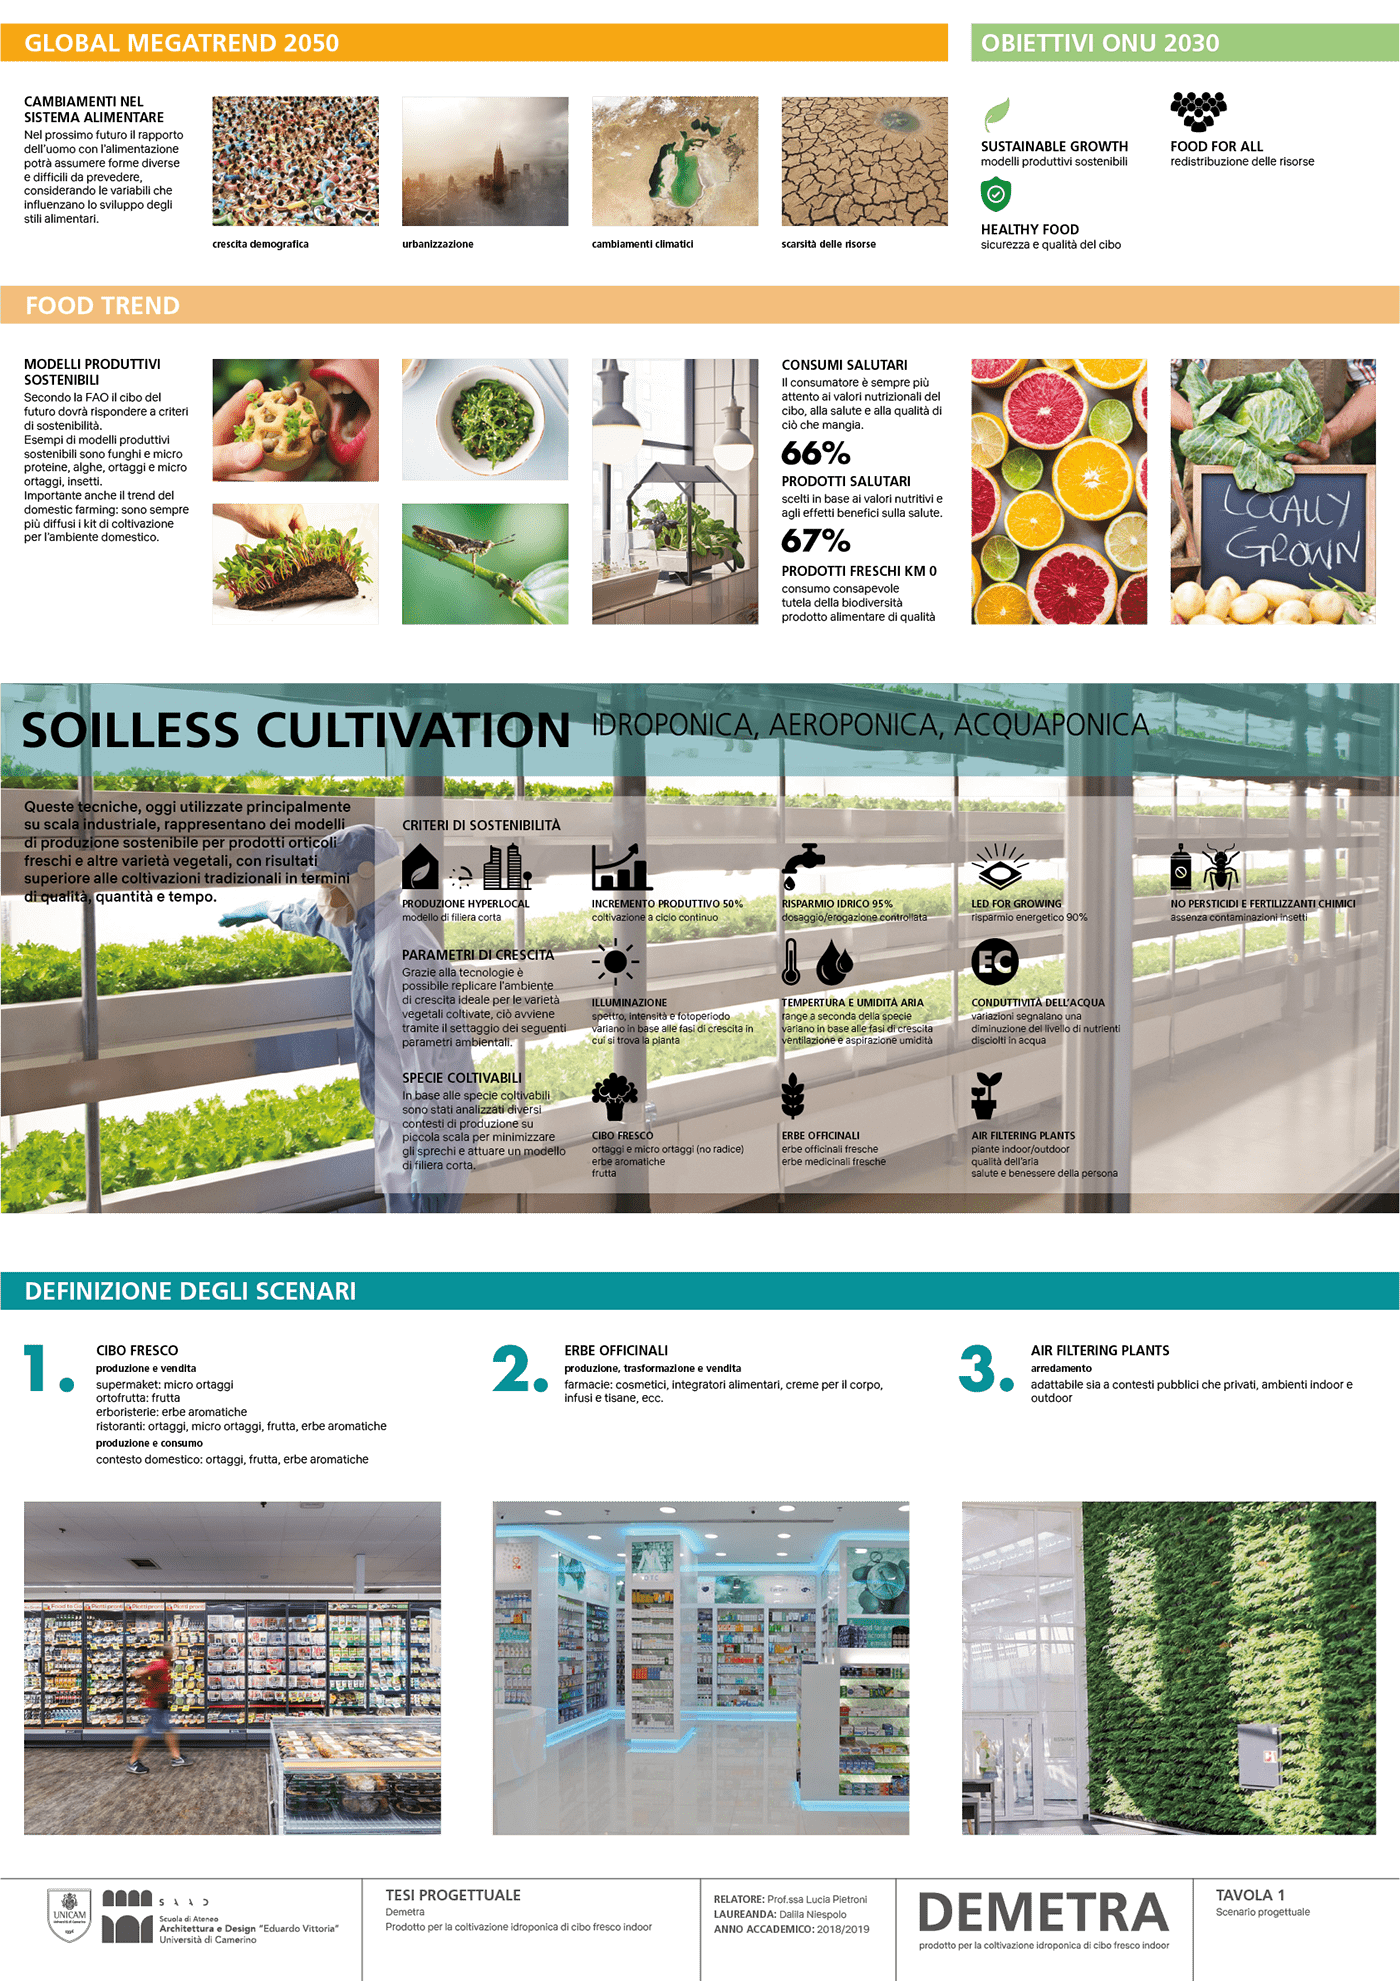 foodtrend future healthyfood hydroponic indoorcultivation Interface product productdesign